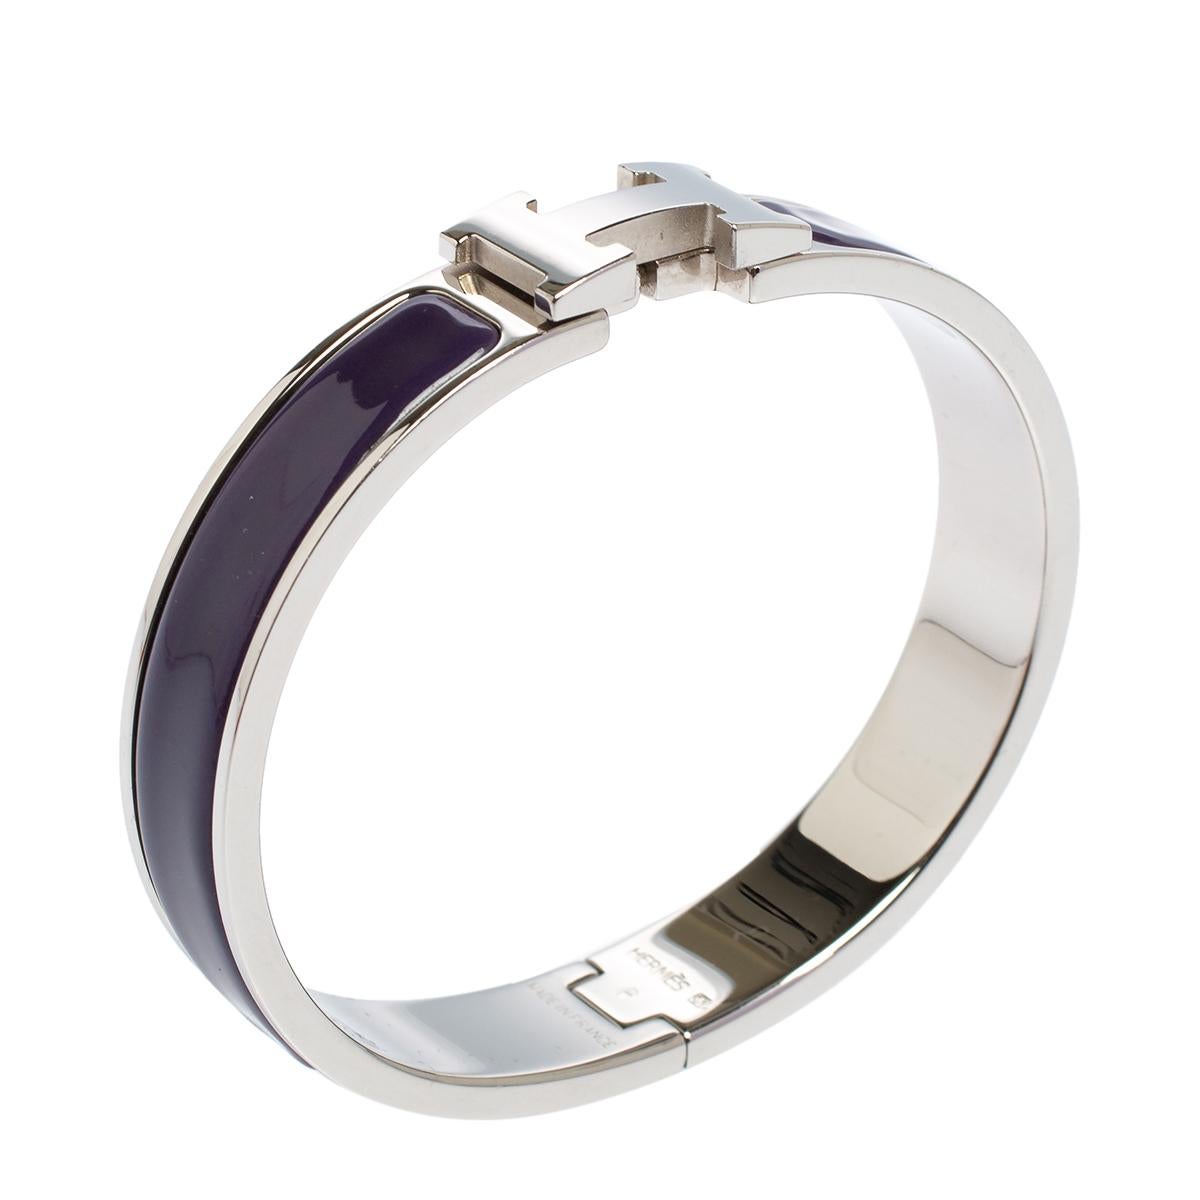 Adorn your wrist with this stunner of a bracelet from Hermès. The piece is from their Clic H collection, and it has been crafted from palladium-plated metal and designed with purple enamel. This bracelet is complete with the iconic H to the front.